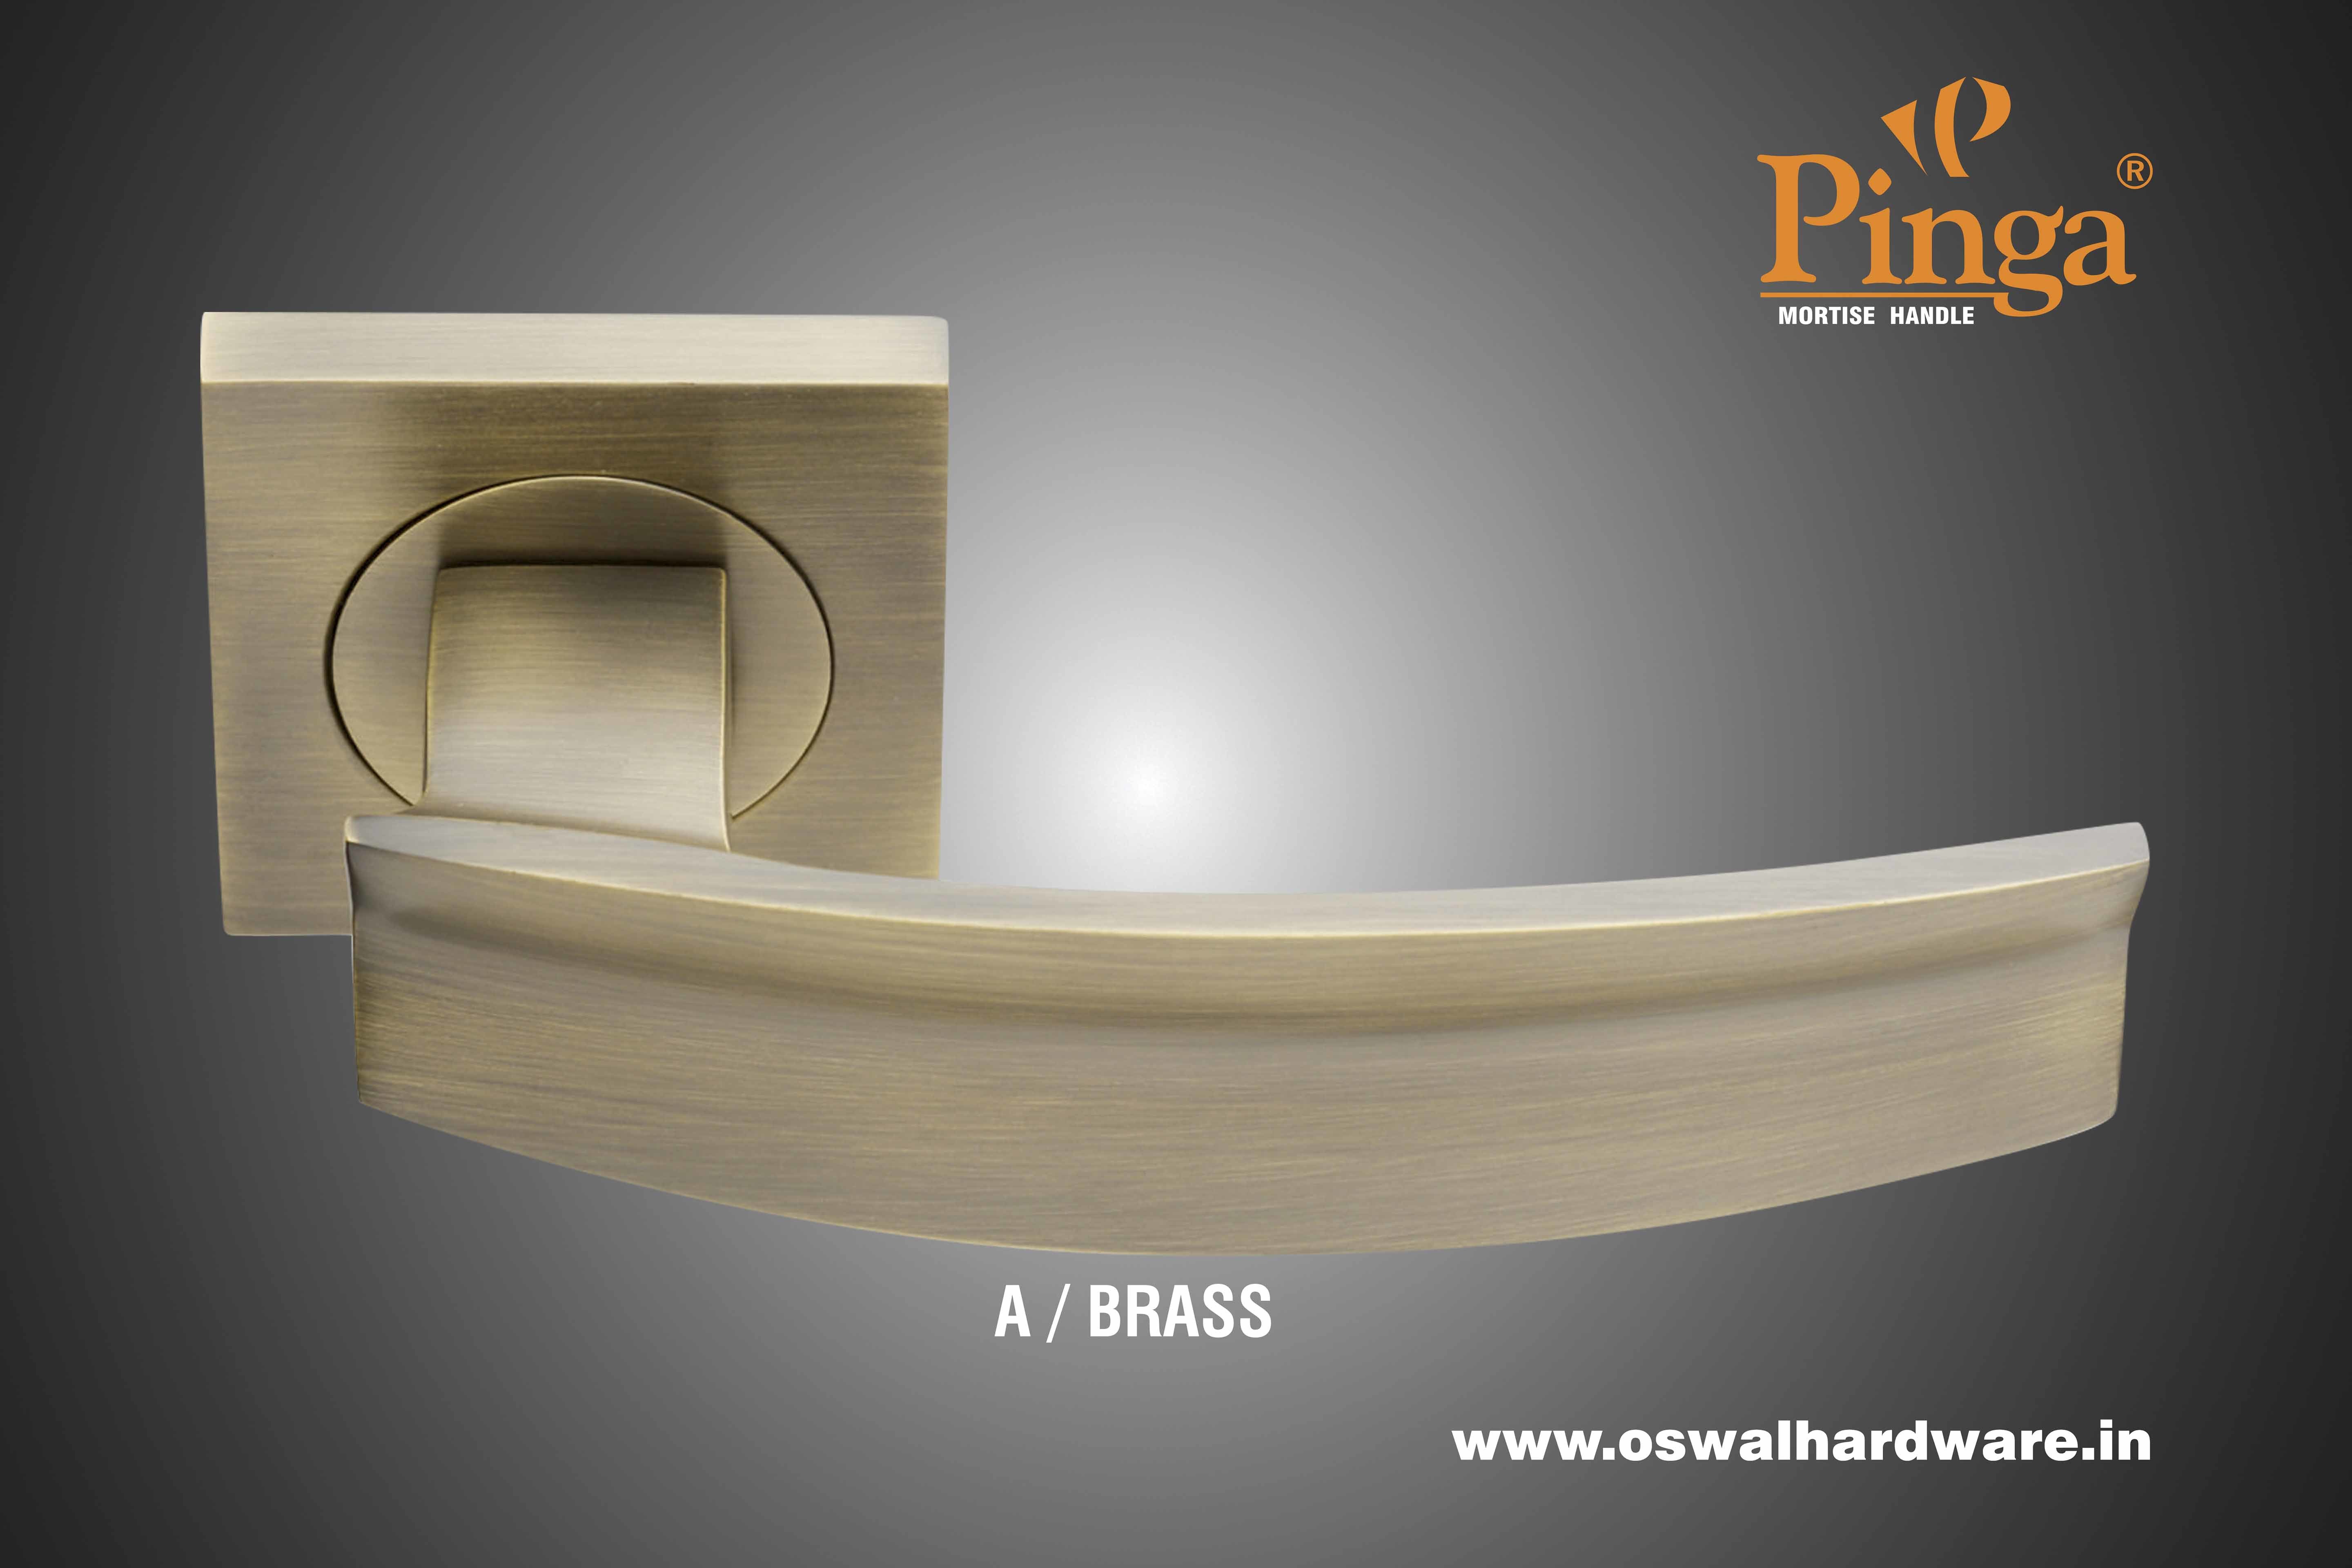 Mortise Handle Brass 2008